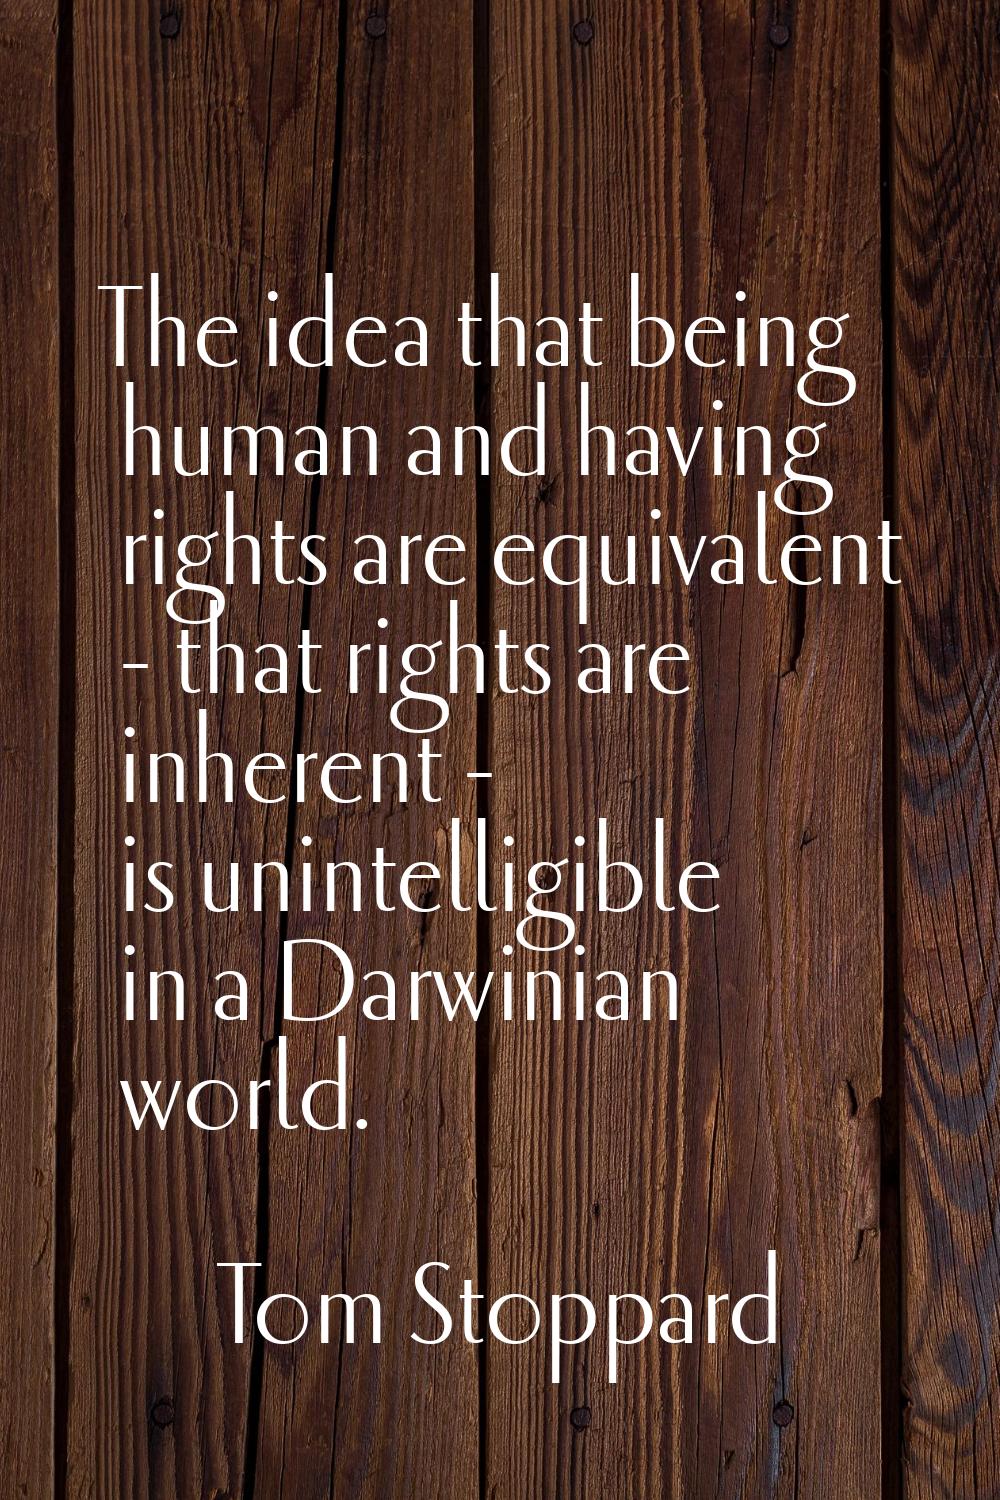 The idea that being human and having rights are equivalent - that rights are inherent - is unintell